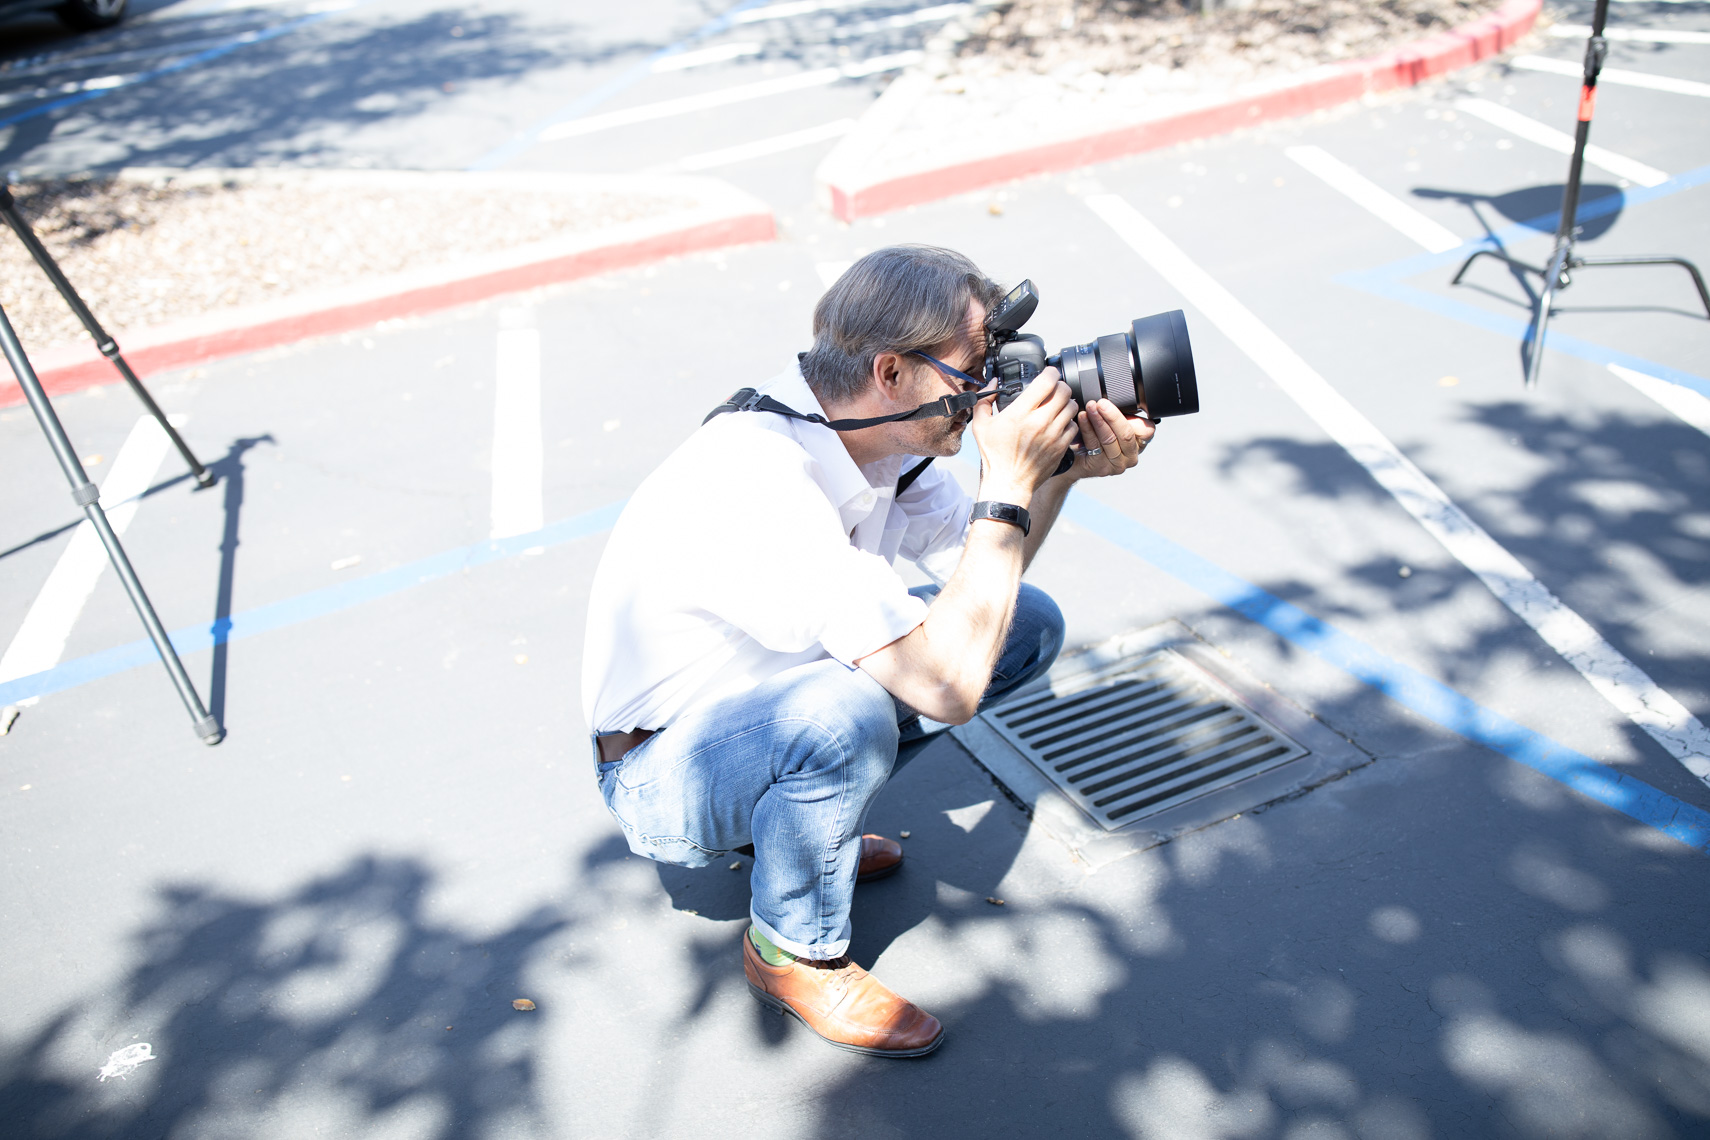 Testing in the shade. Behind the scenes. Robert Houser is an annual report, fitness, healthcare, advertising and editorial photographer based in Oakland, California.